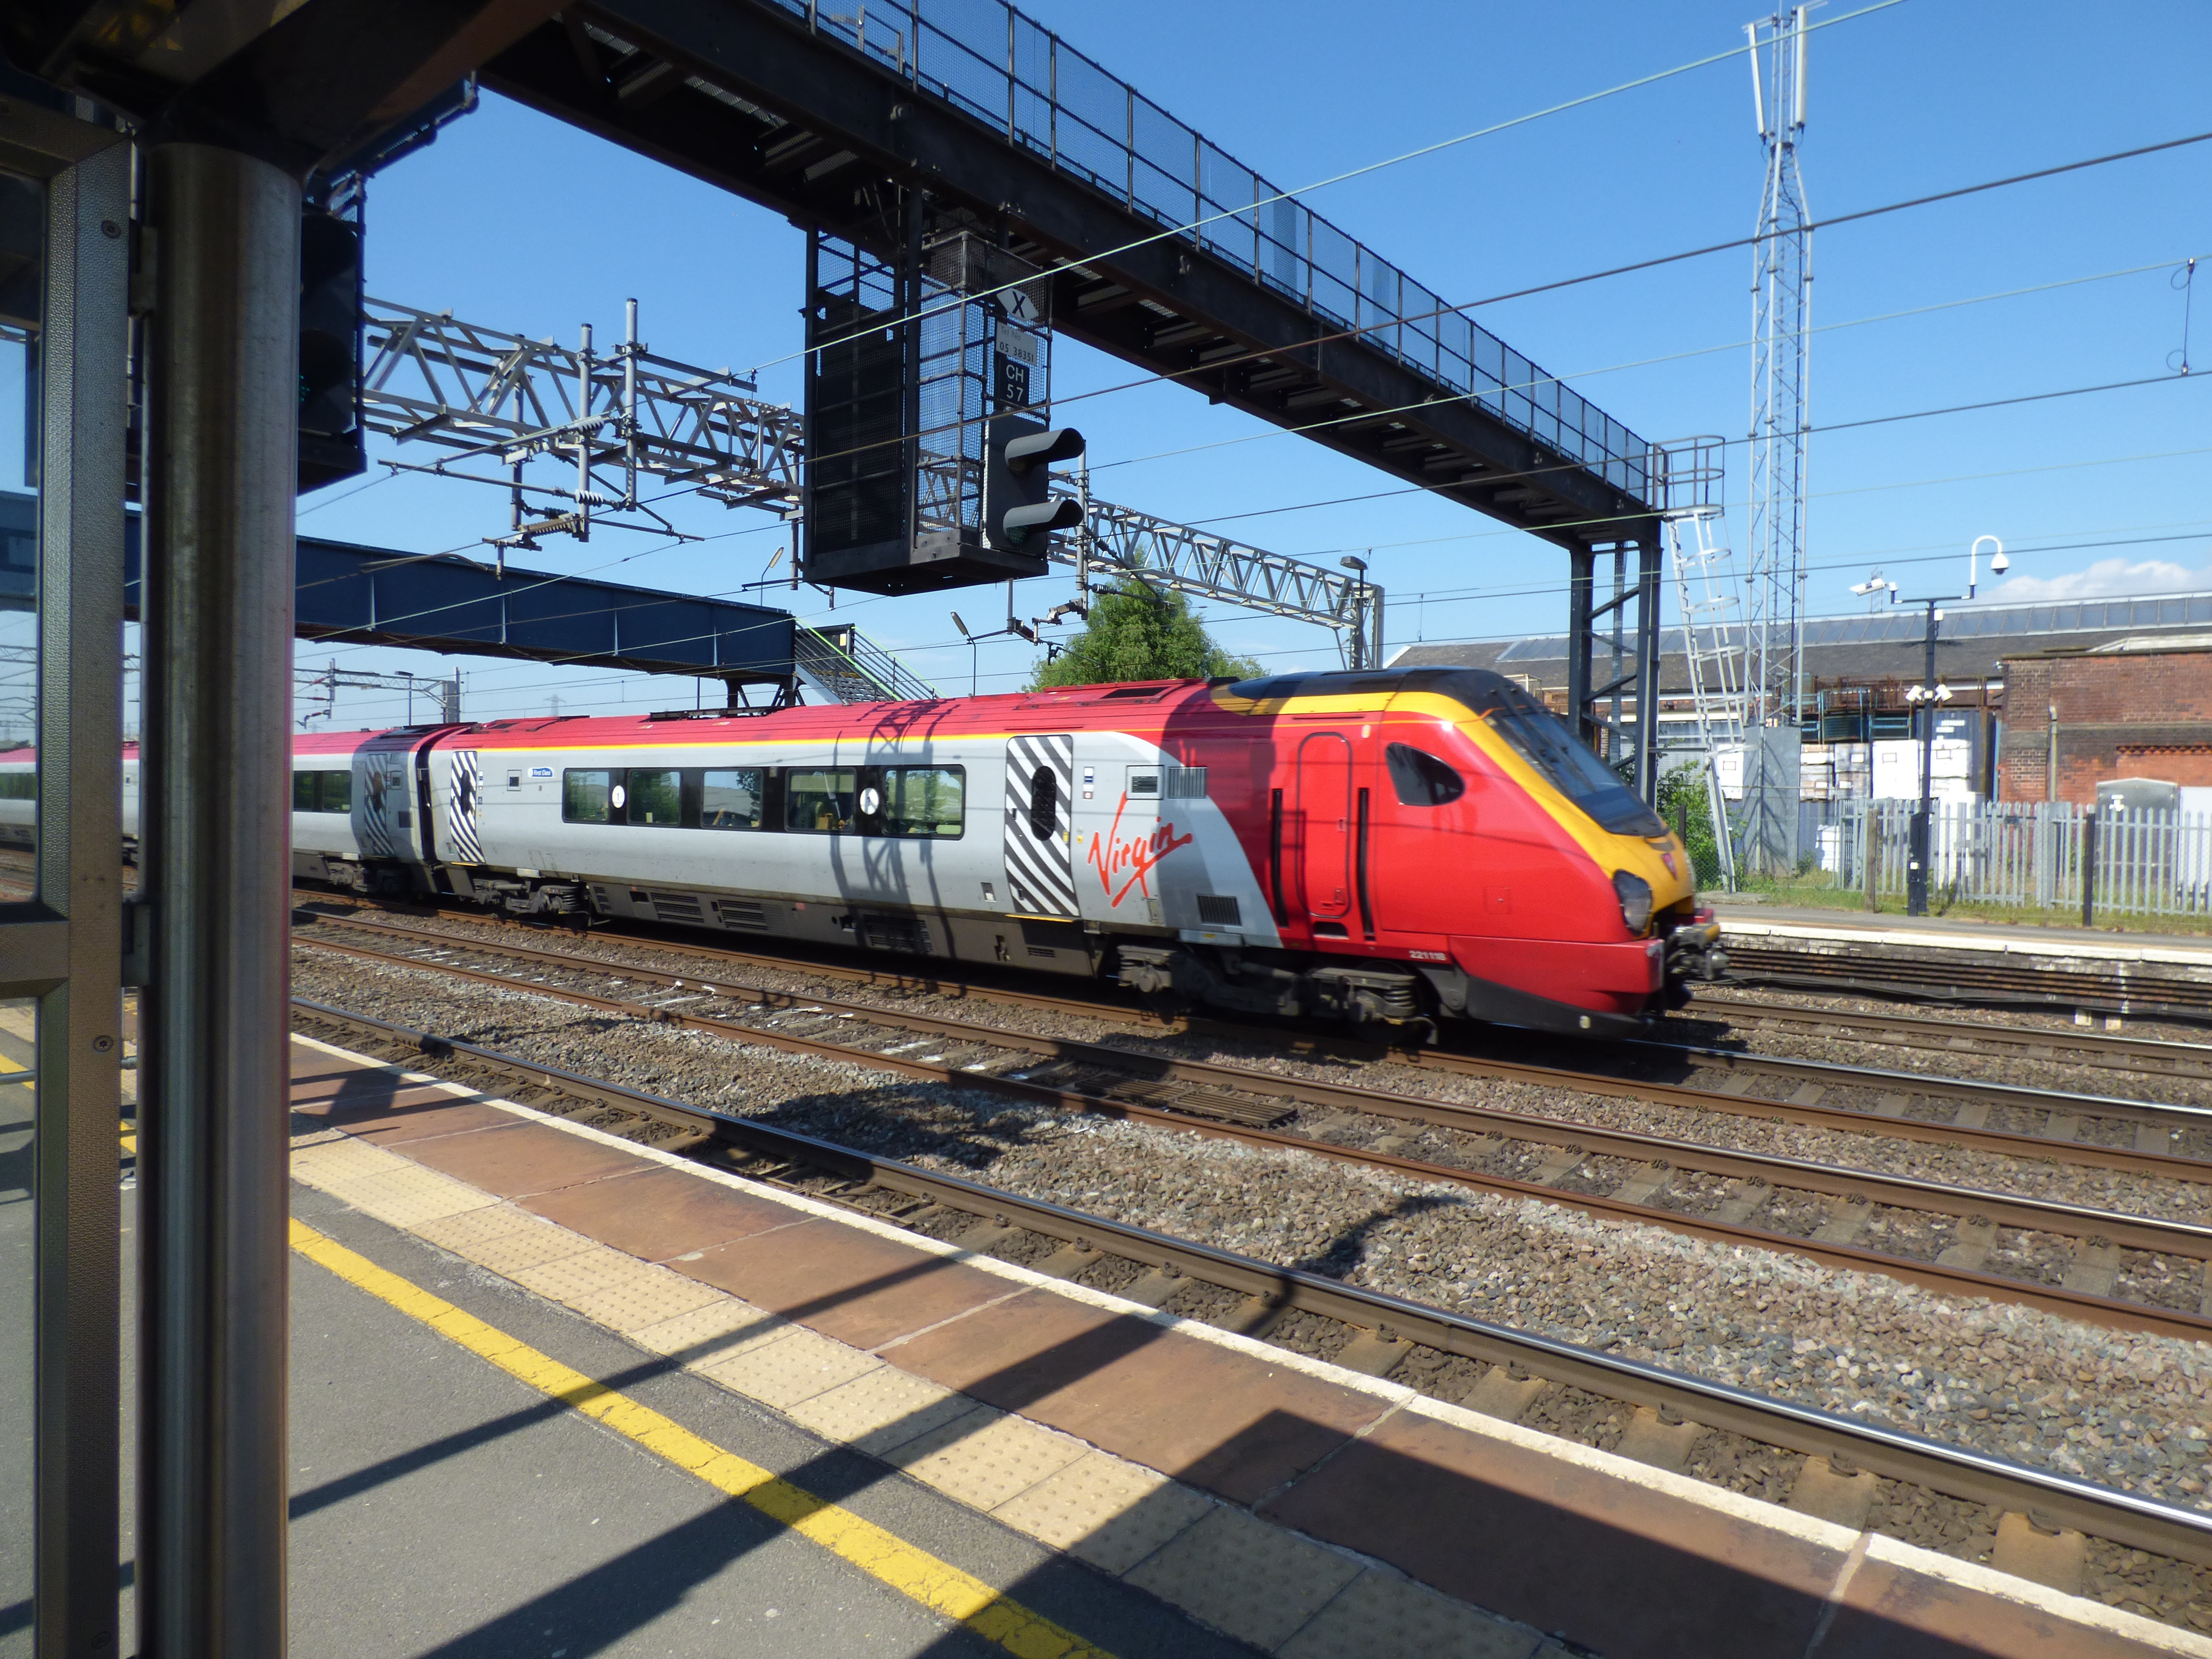 Virgin Trains are already a brand in the United Kingdom and now Brightline will adopt the Virgin Trains USA name